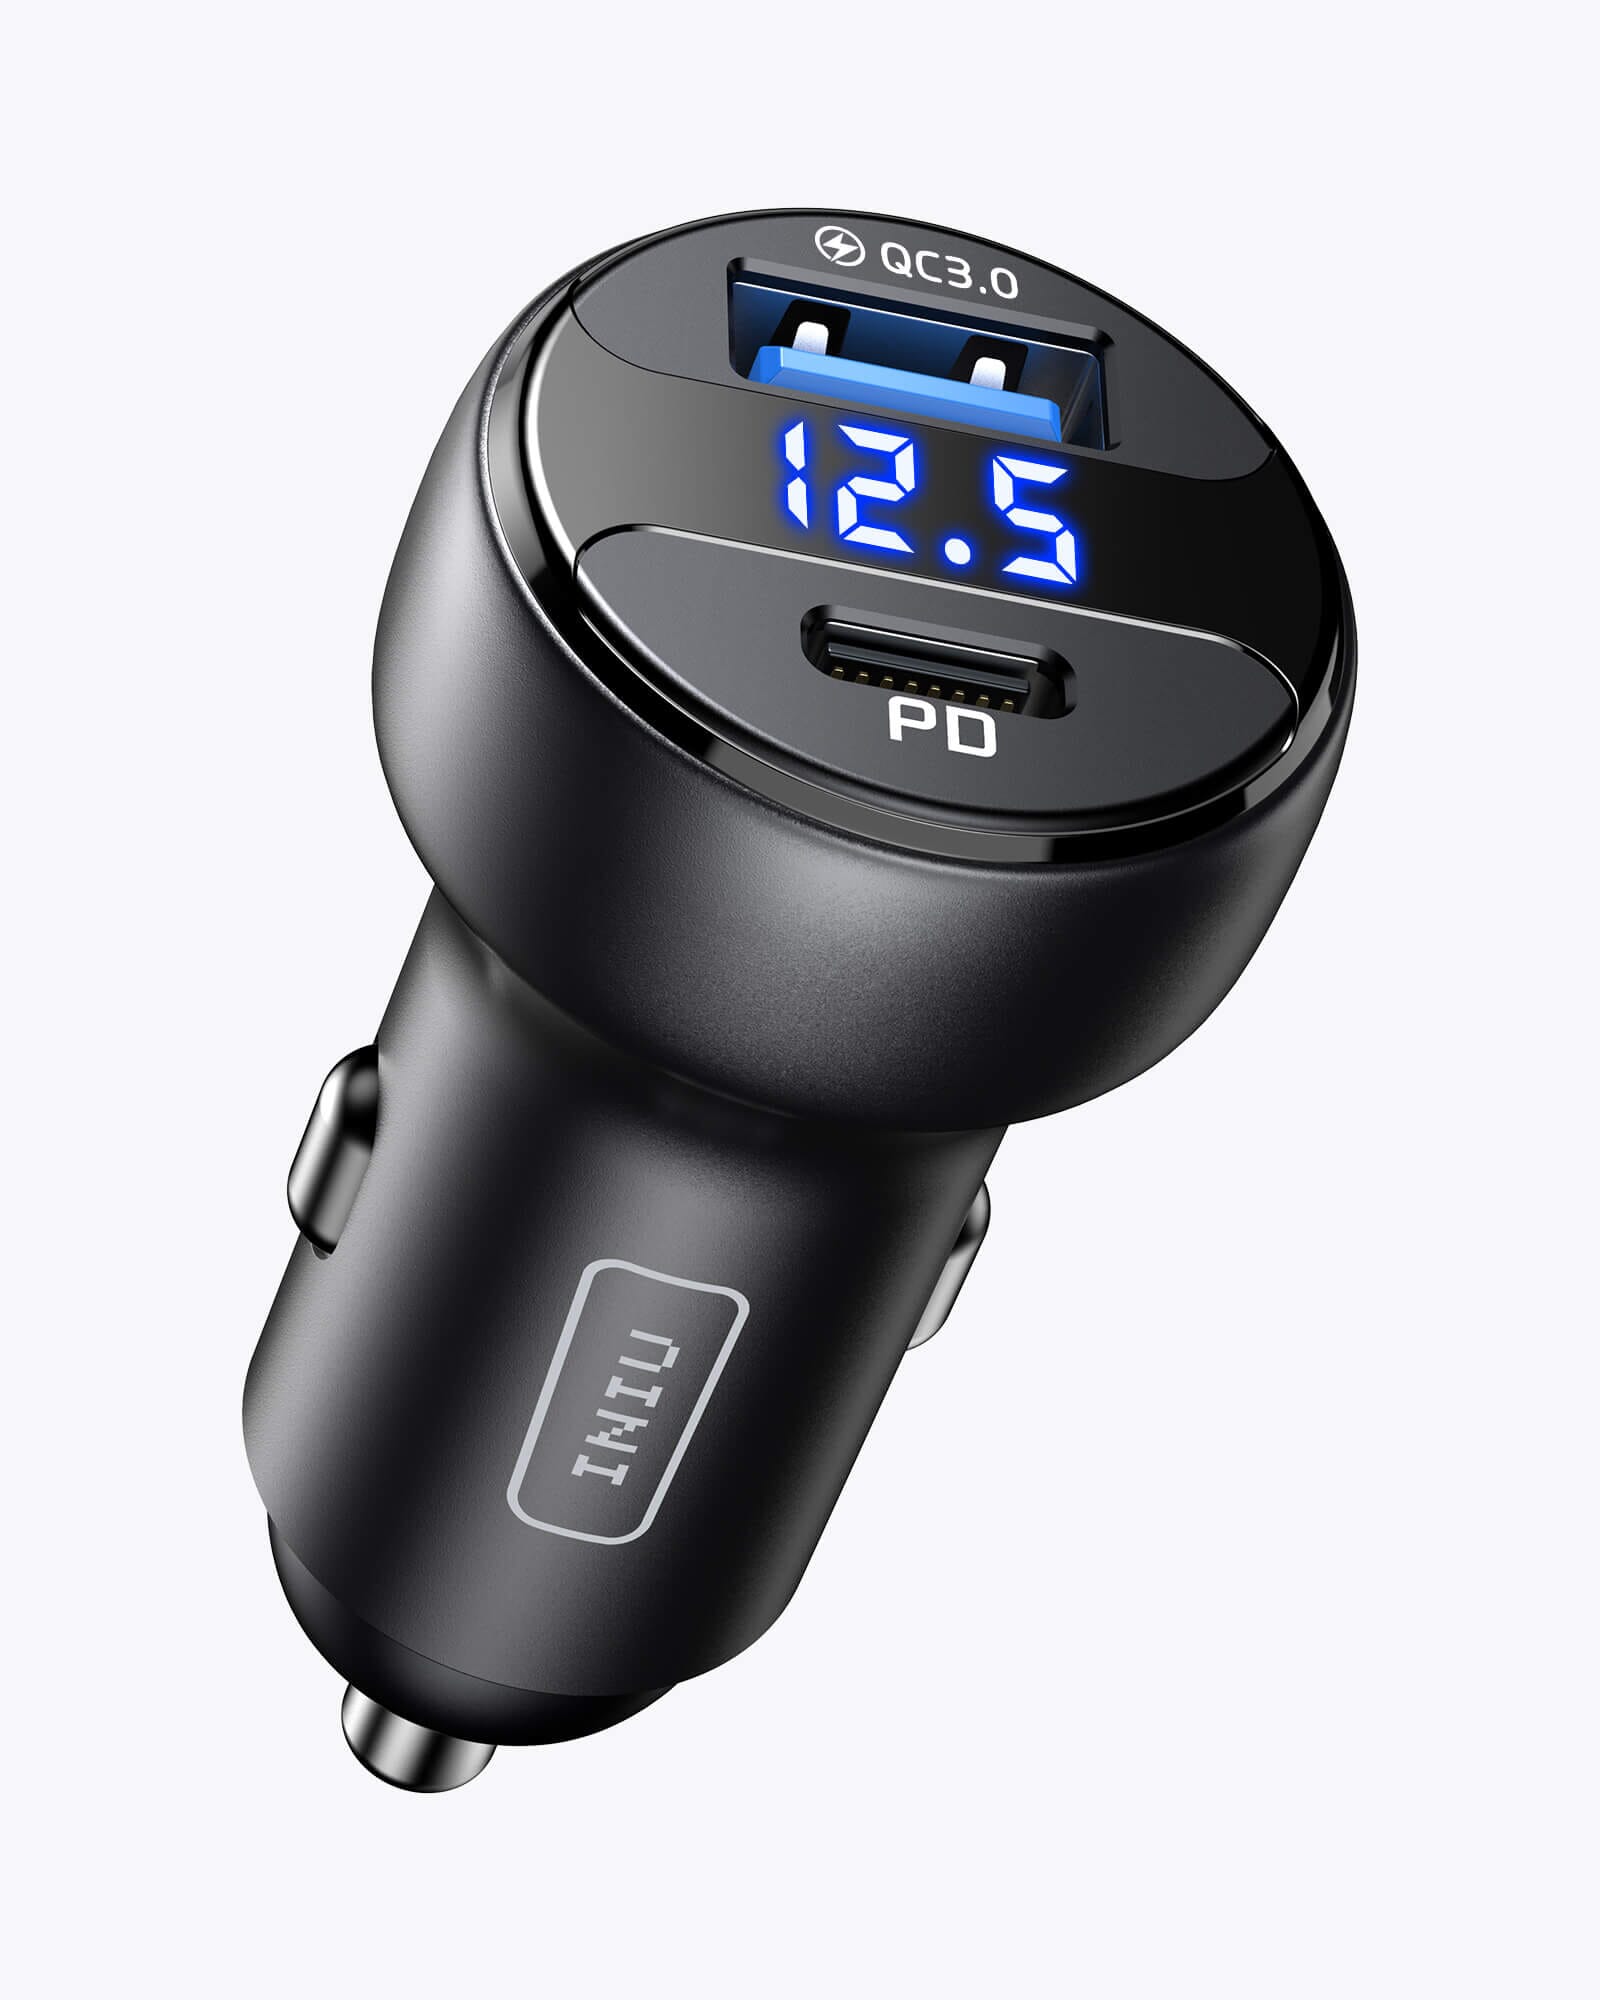 INIU 66W Car Usb-c Charger CI-711 With Voltage Display